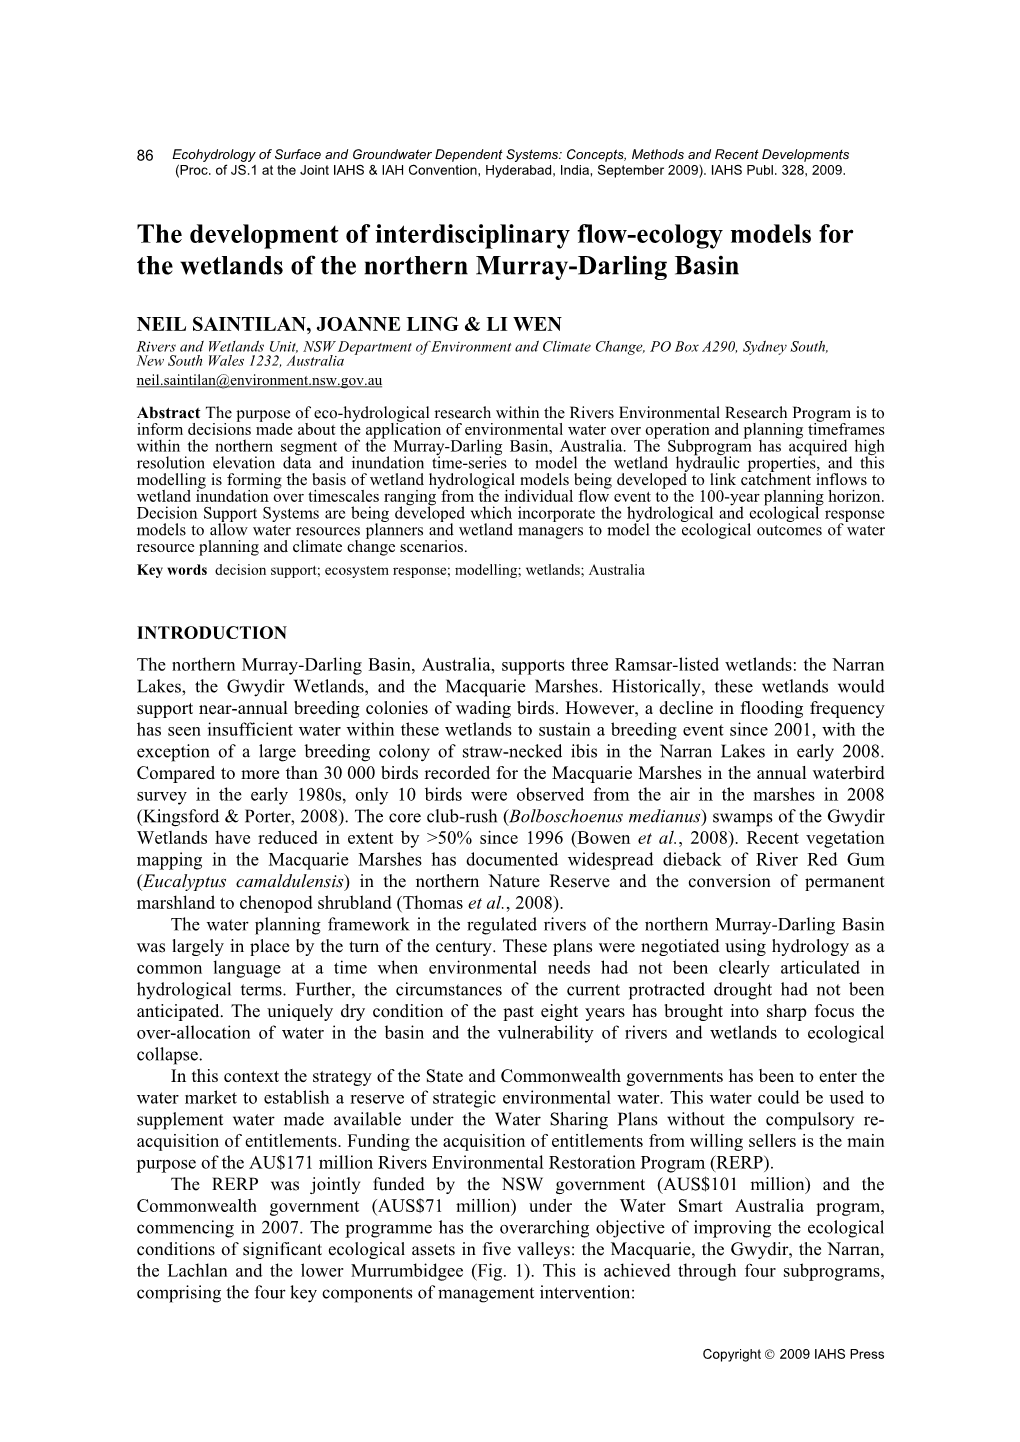 The Development of Interdisciplinary Flow-Ecology Models for the Wetlands of the Northern Murray-Darling Basin